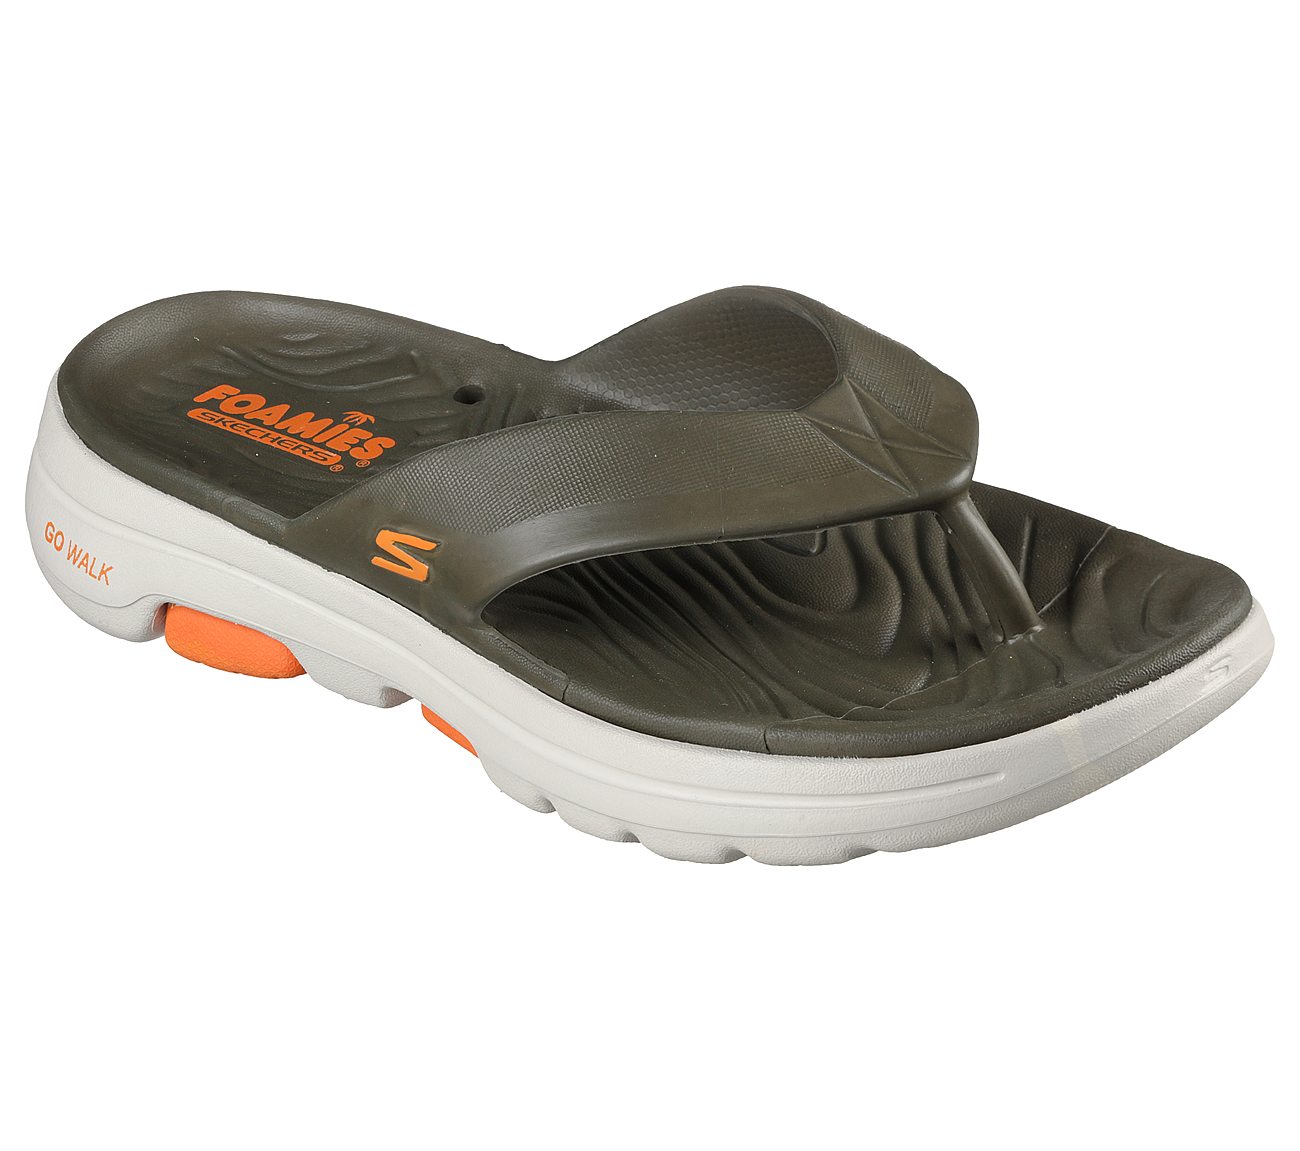 GO WALK 5 - SIT BACK, OOLIVE Footwear Right View